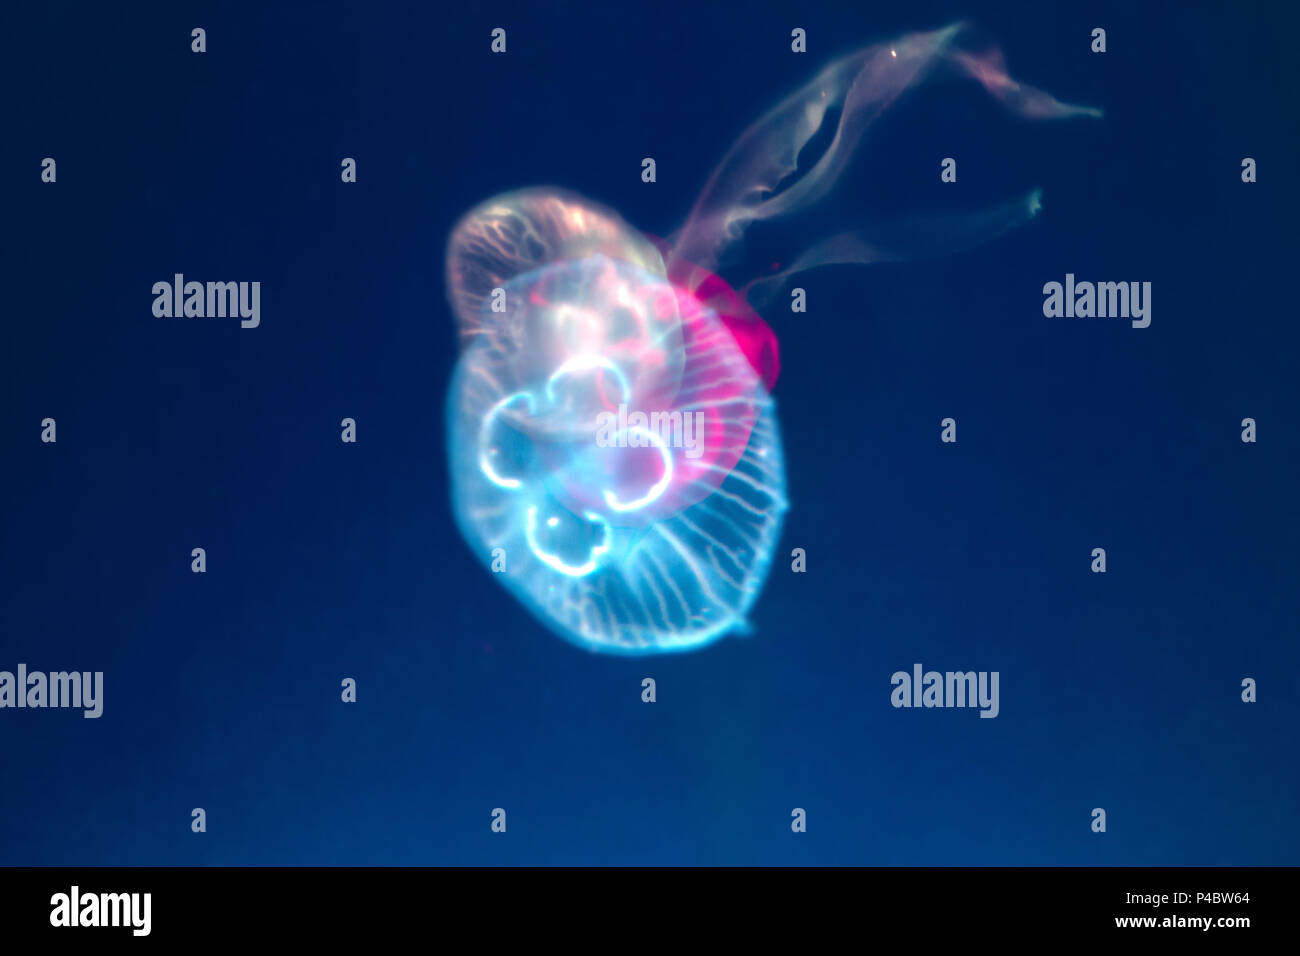 Abstract blur colorful shape jellyfishs deep underwater sea background. Stock Photo